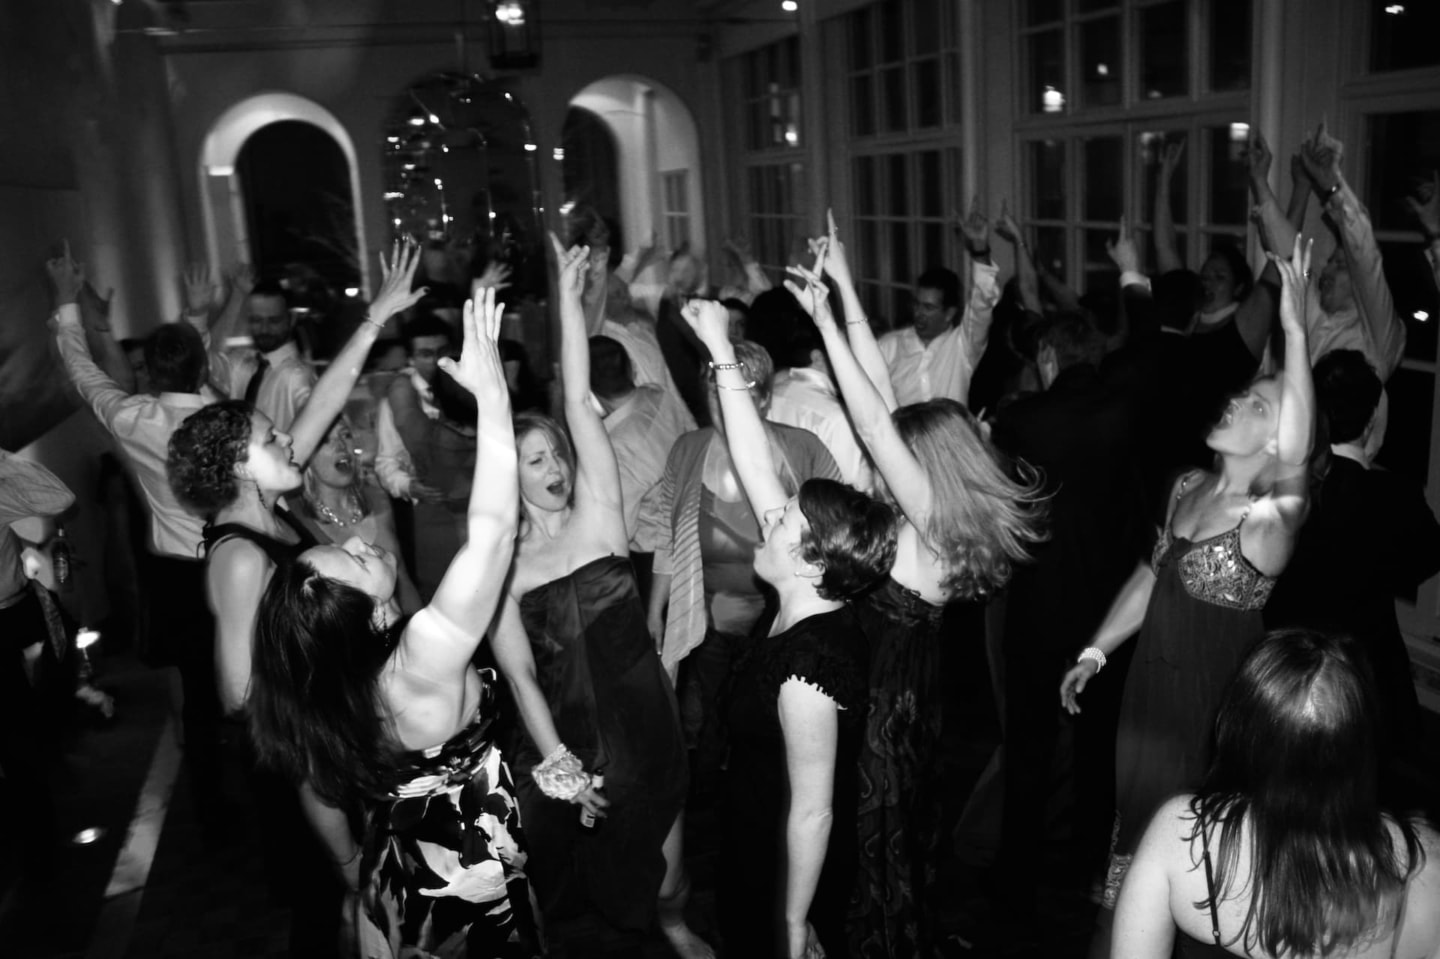 Arms in the air at a wedding celebration